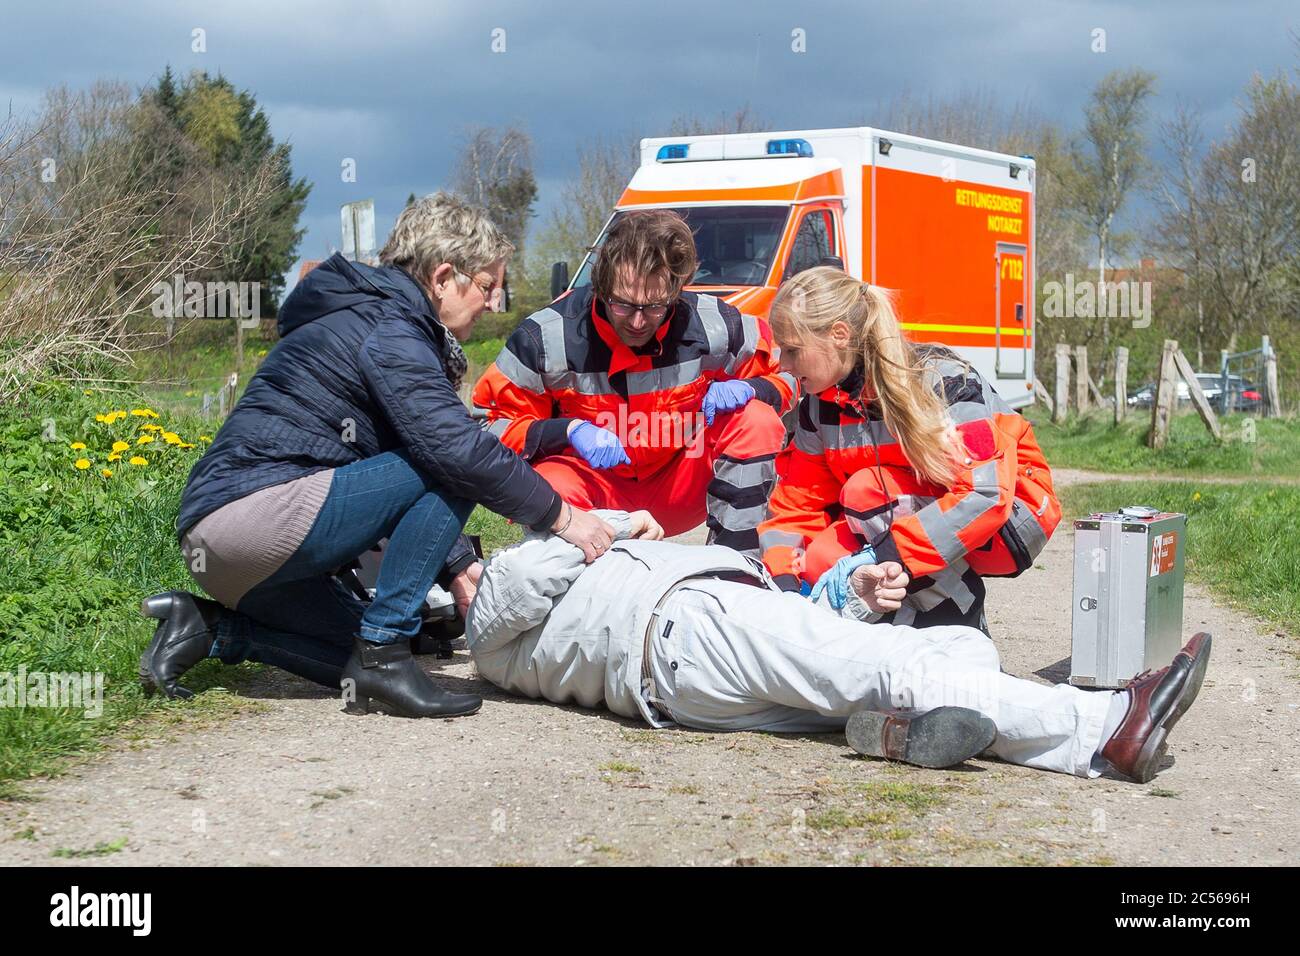 Germany. 23rd Apr, 2017. Regarding Sandra Arens' topic service report of 1 July 2020: 'The faster help comes, the better - that's why you should call 112 immediately if someone shows stroke symptoms. Credit: Benjamin Nolte/dpa-tmn/dpa/Alamy Live News Stock Photo